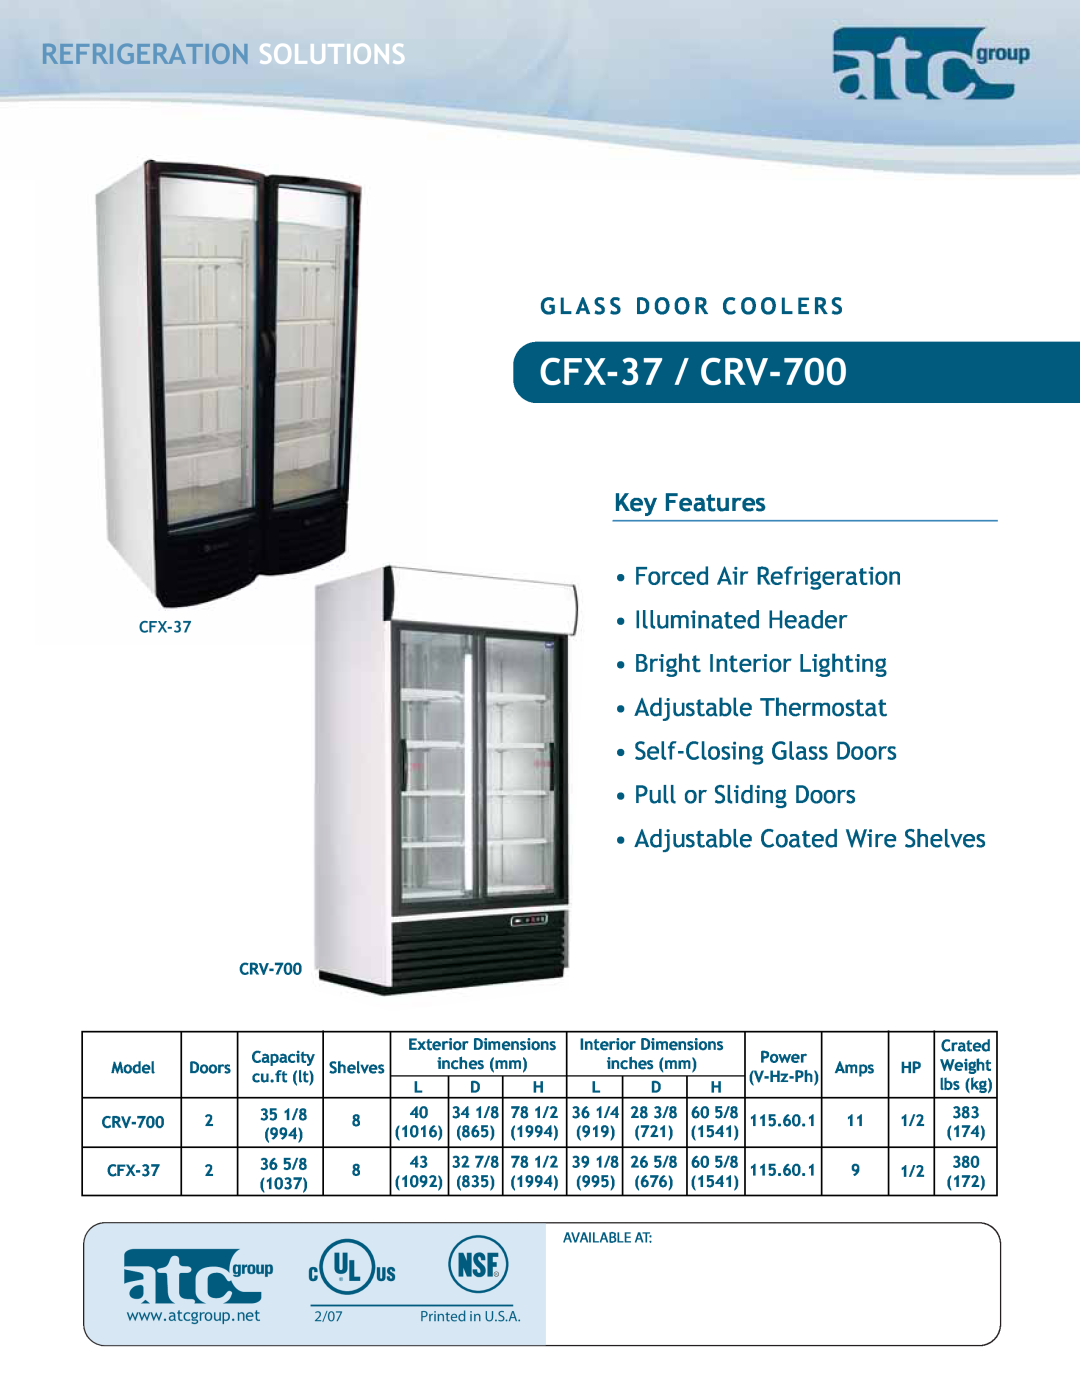 ATC Group CFX 37 dimensions Refrigeration Solutions, CFX-37 / CRV-700, Key Features, Adjustable Coated Wire Shelves 